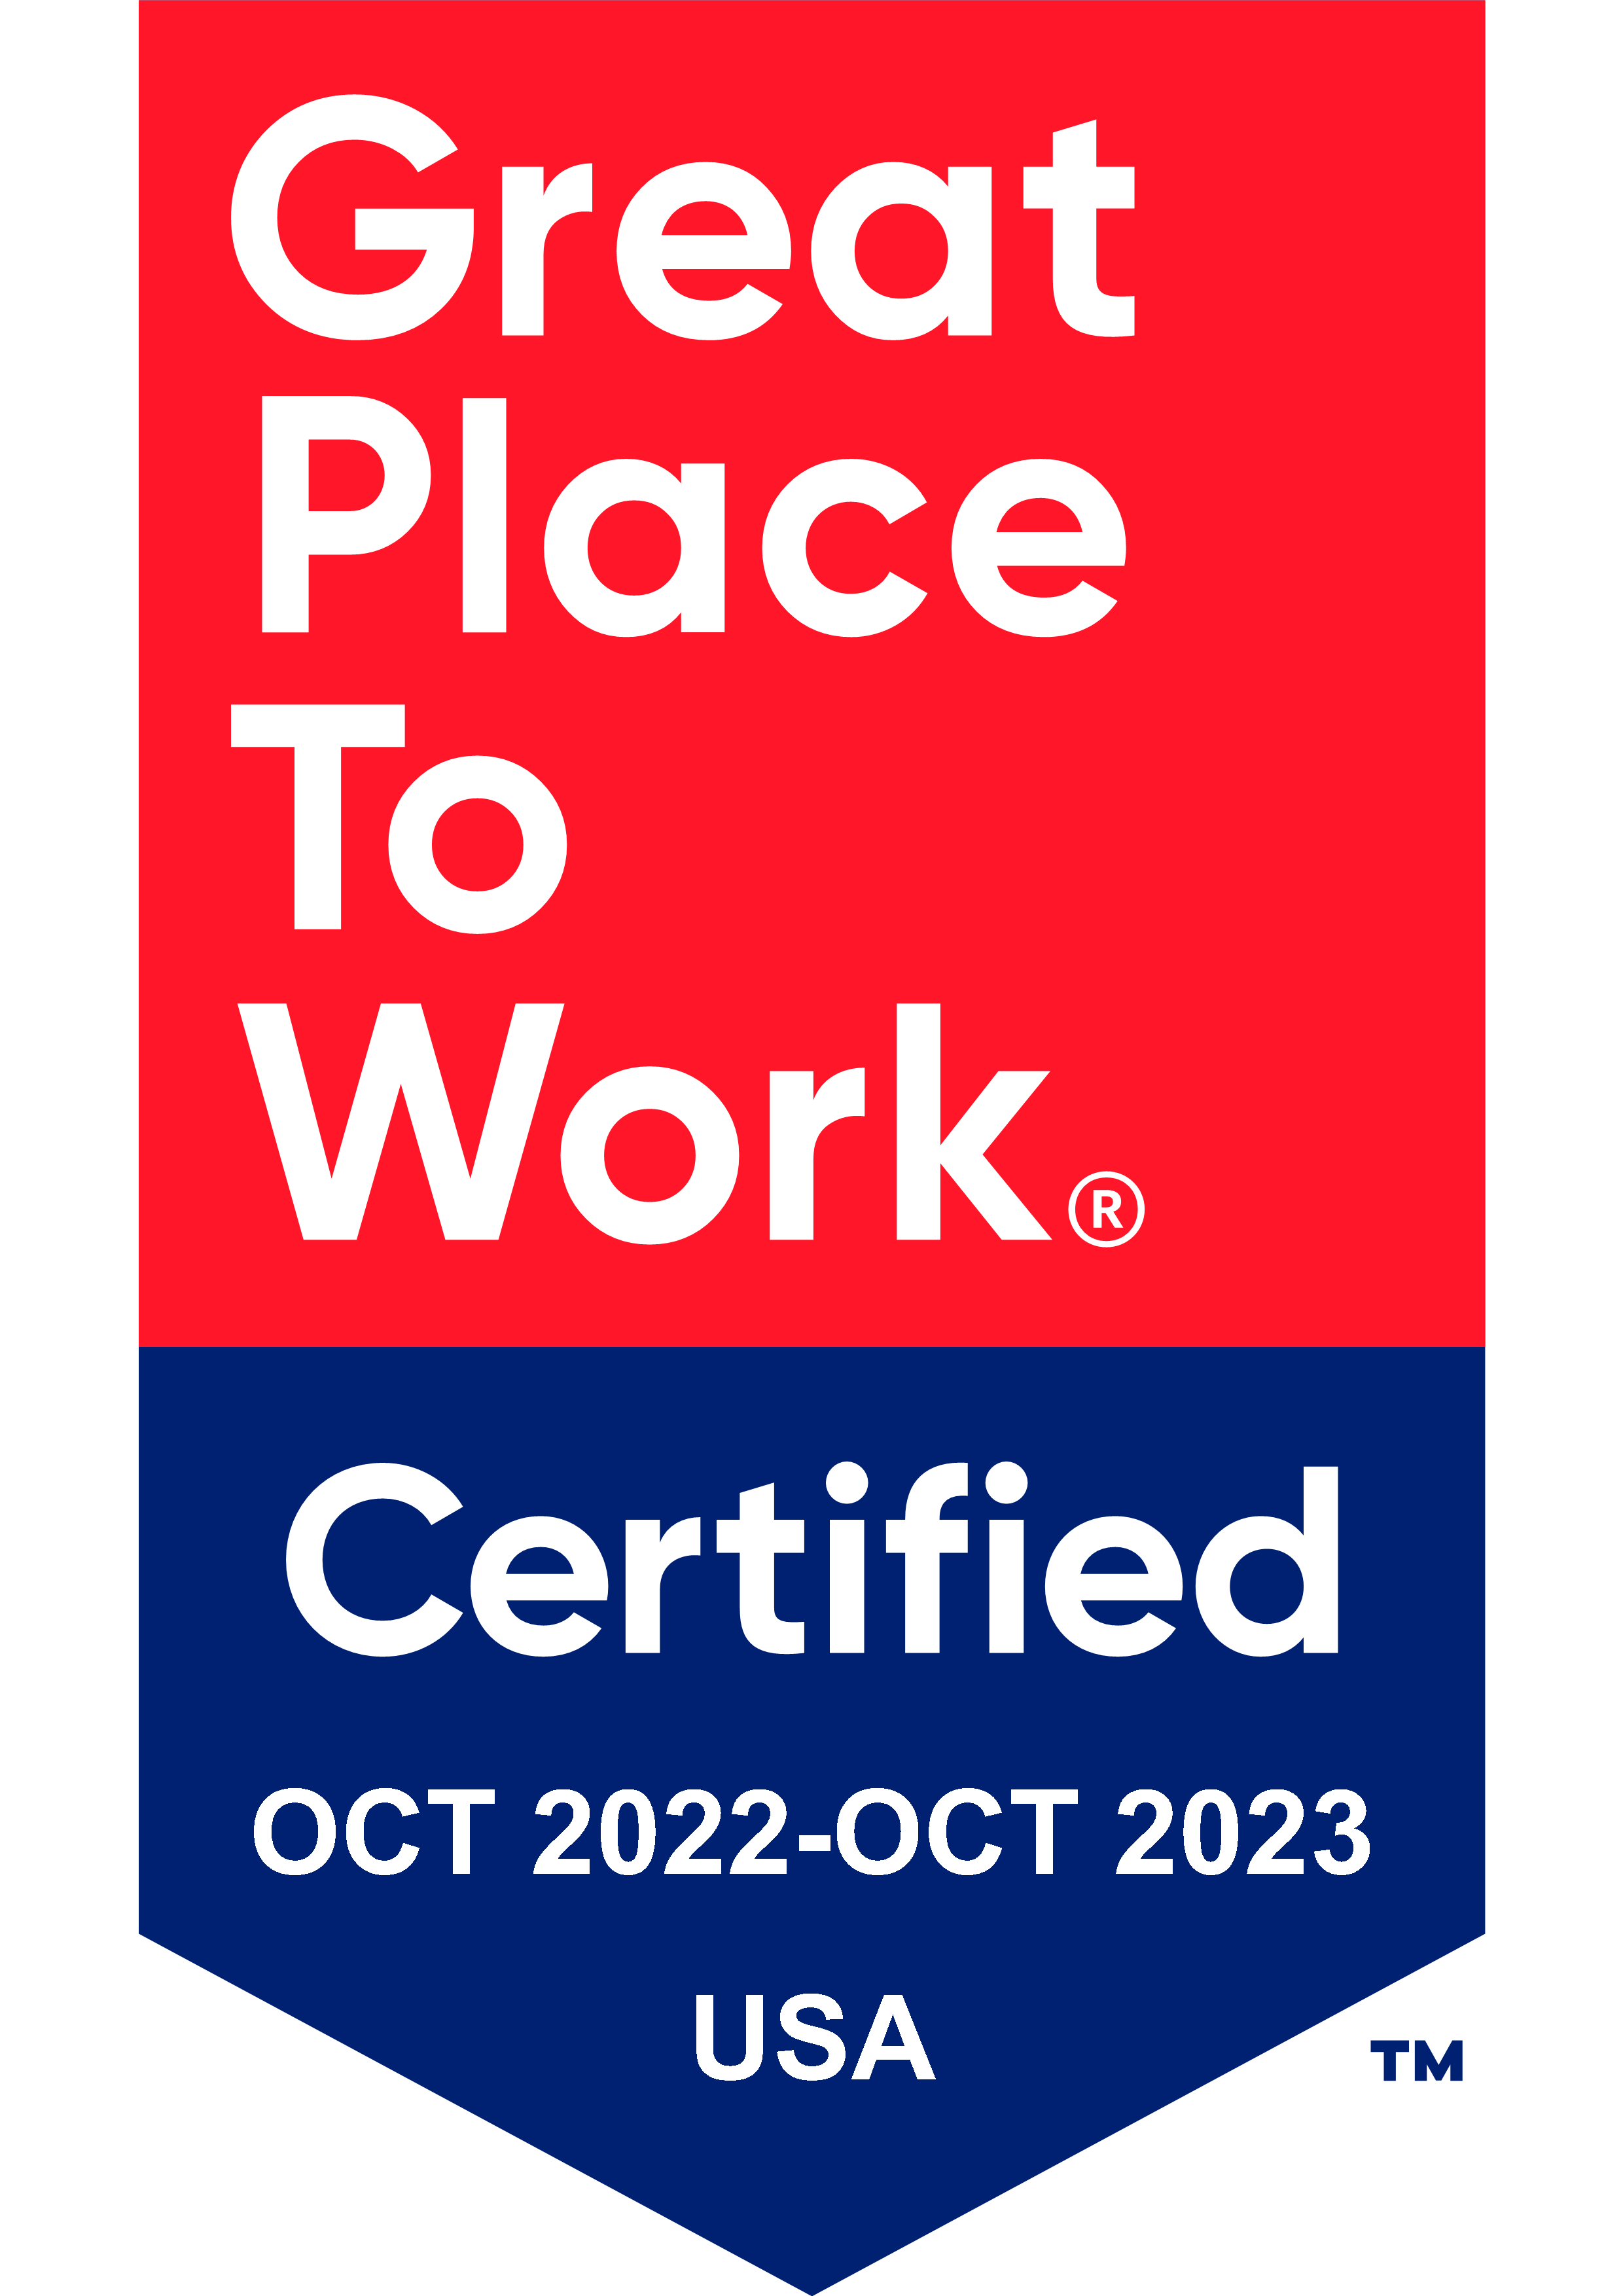 Great Place to Work certified Oct 2022-Oct 2023